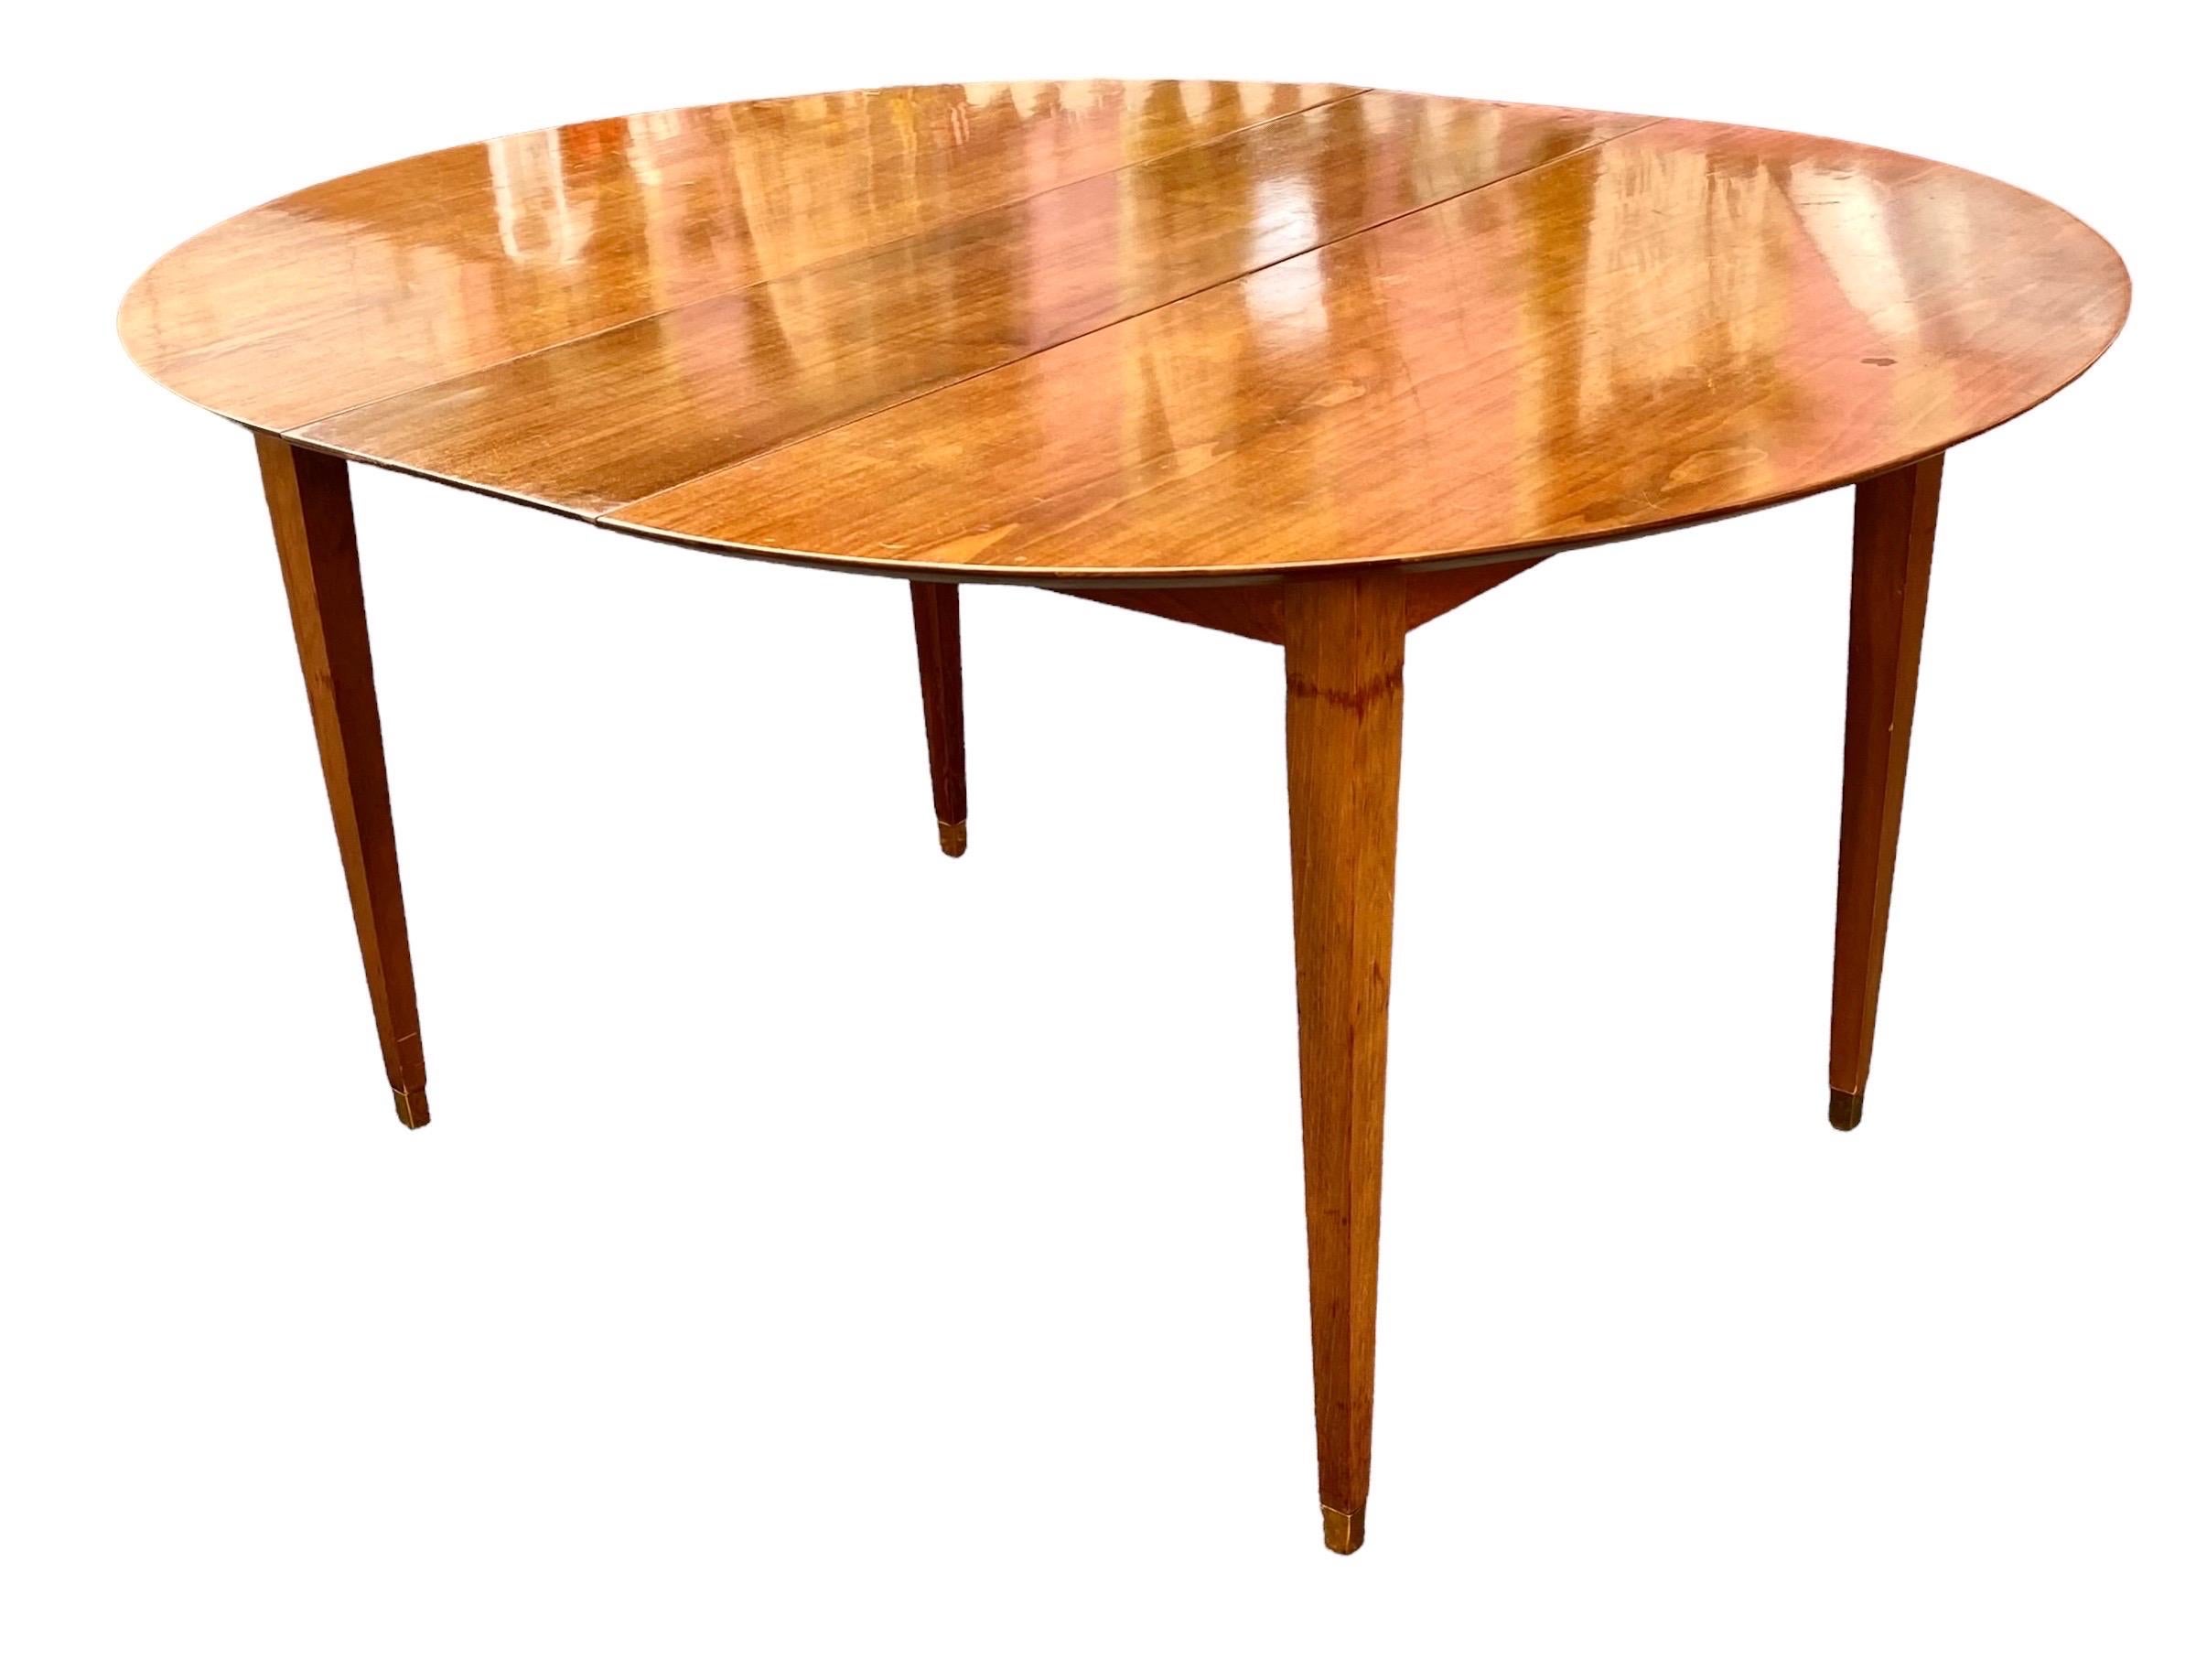 Machine-Made Mid-Century Modern Teak Dining Table, Two Leaves And Four Chairs